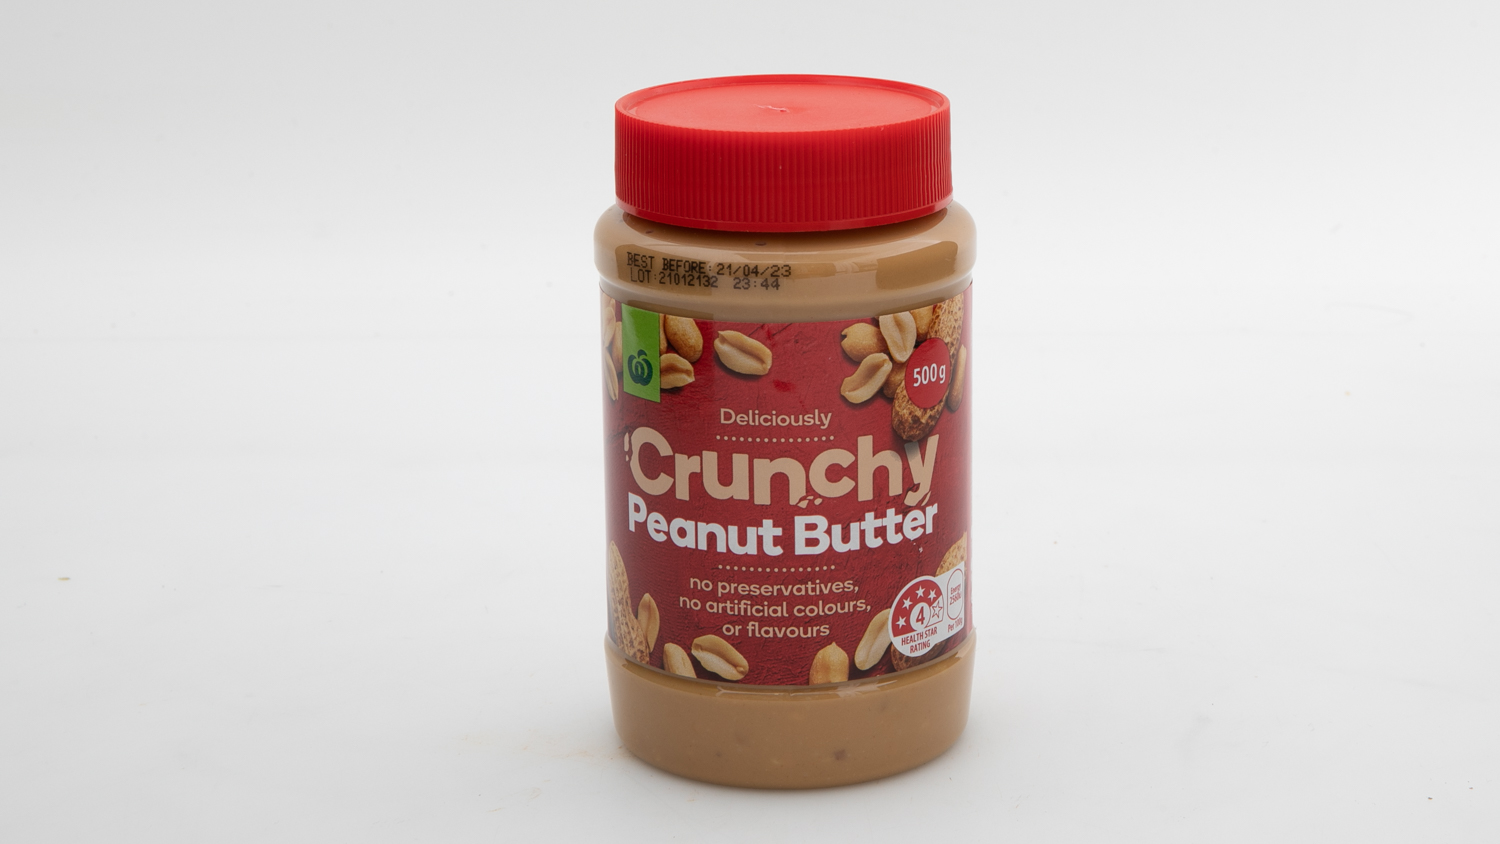 Woolworths Peanut Butter Crunchy carousel image